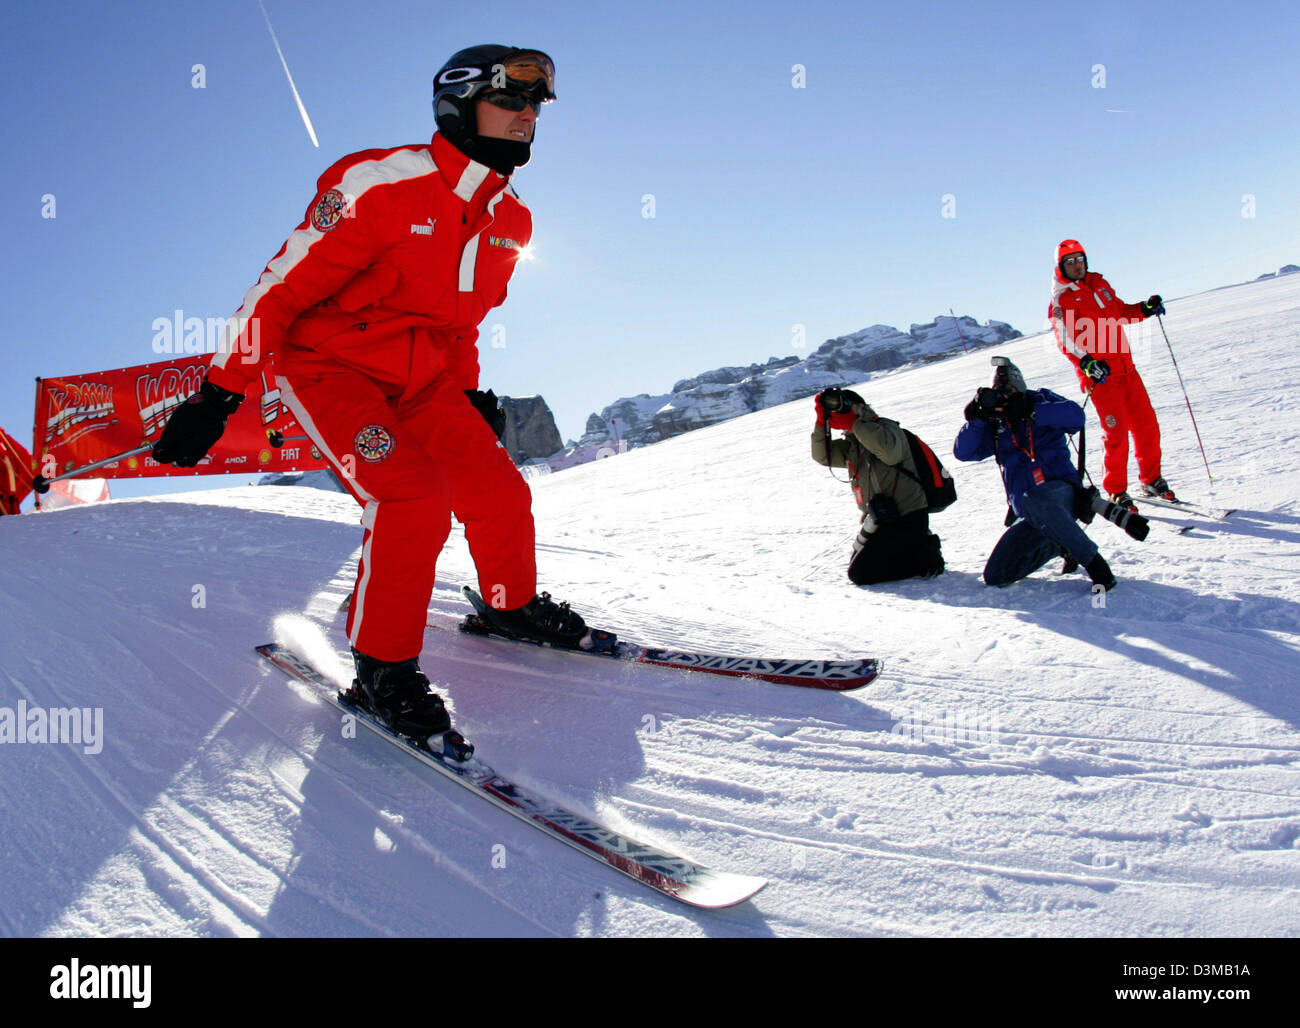 German Formula One driver Michael Schumacher gets into carving position as he takes part in a 'Giant Slalom Ski Race' in Madonna di Campiglio, Italy, late Thursday 12 January 2006. Traditionally, in the beginning of the year the Ferrari team and the drivers spend one week of skiing themed 'Wrooom'. Photo: Rainer Jensen Stock Photo